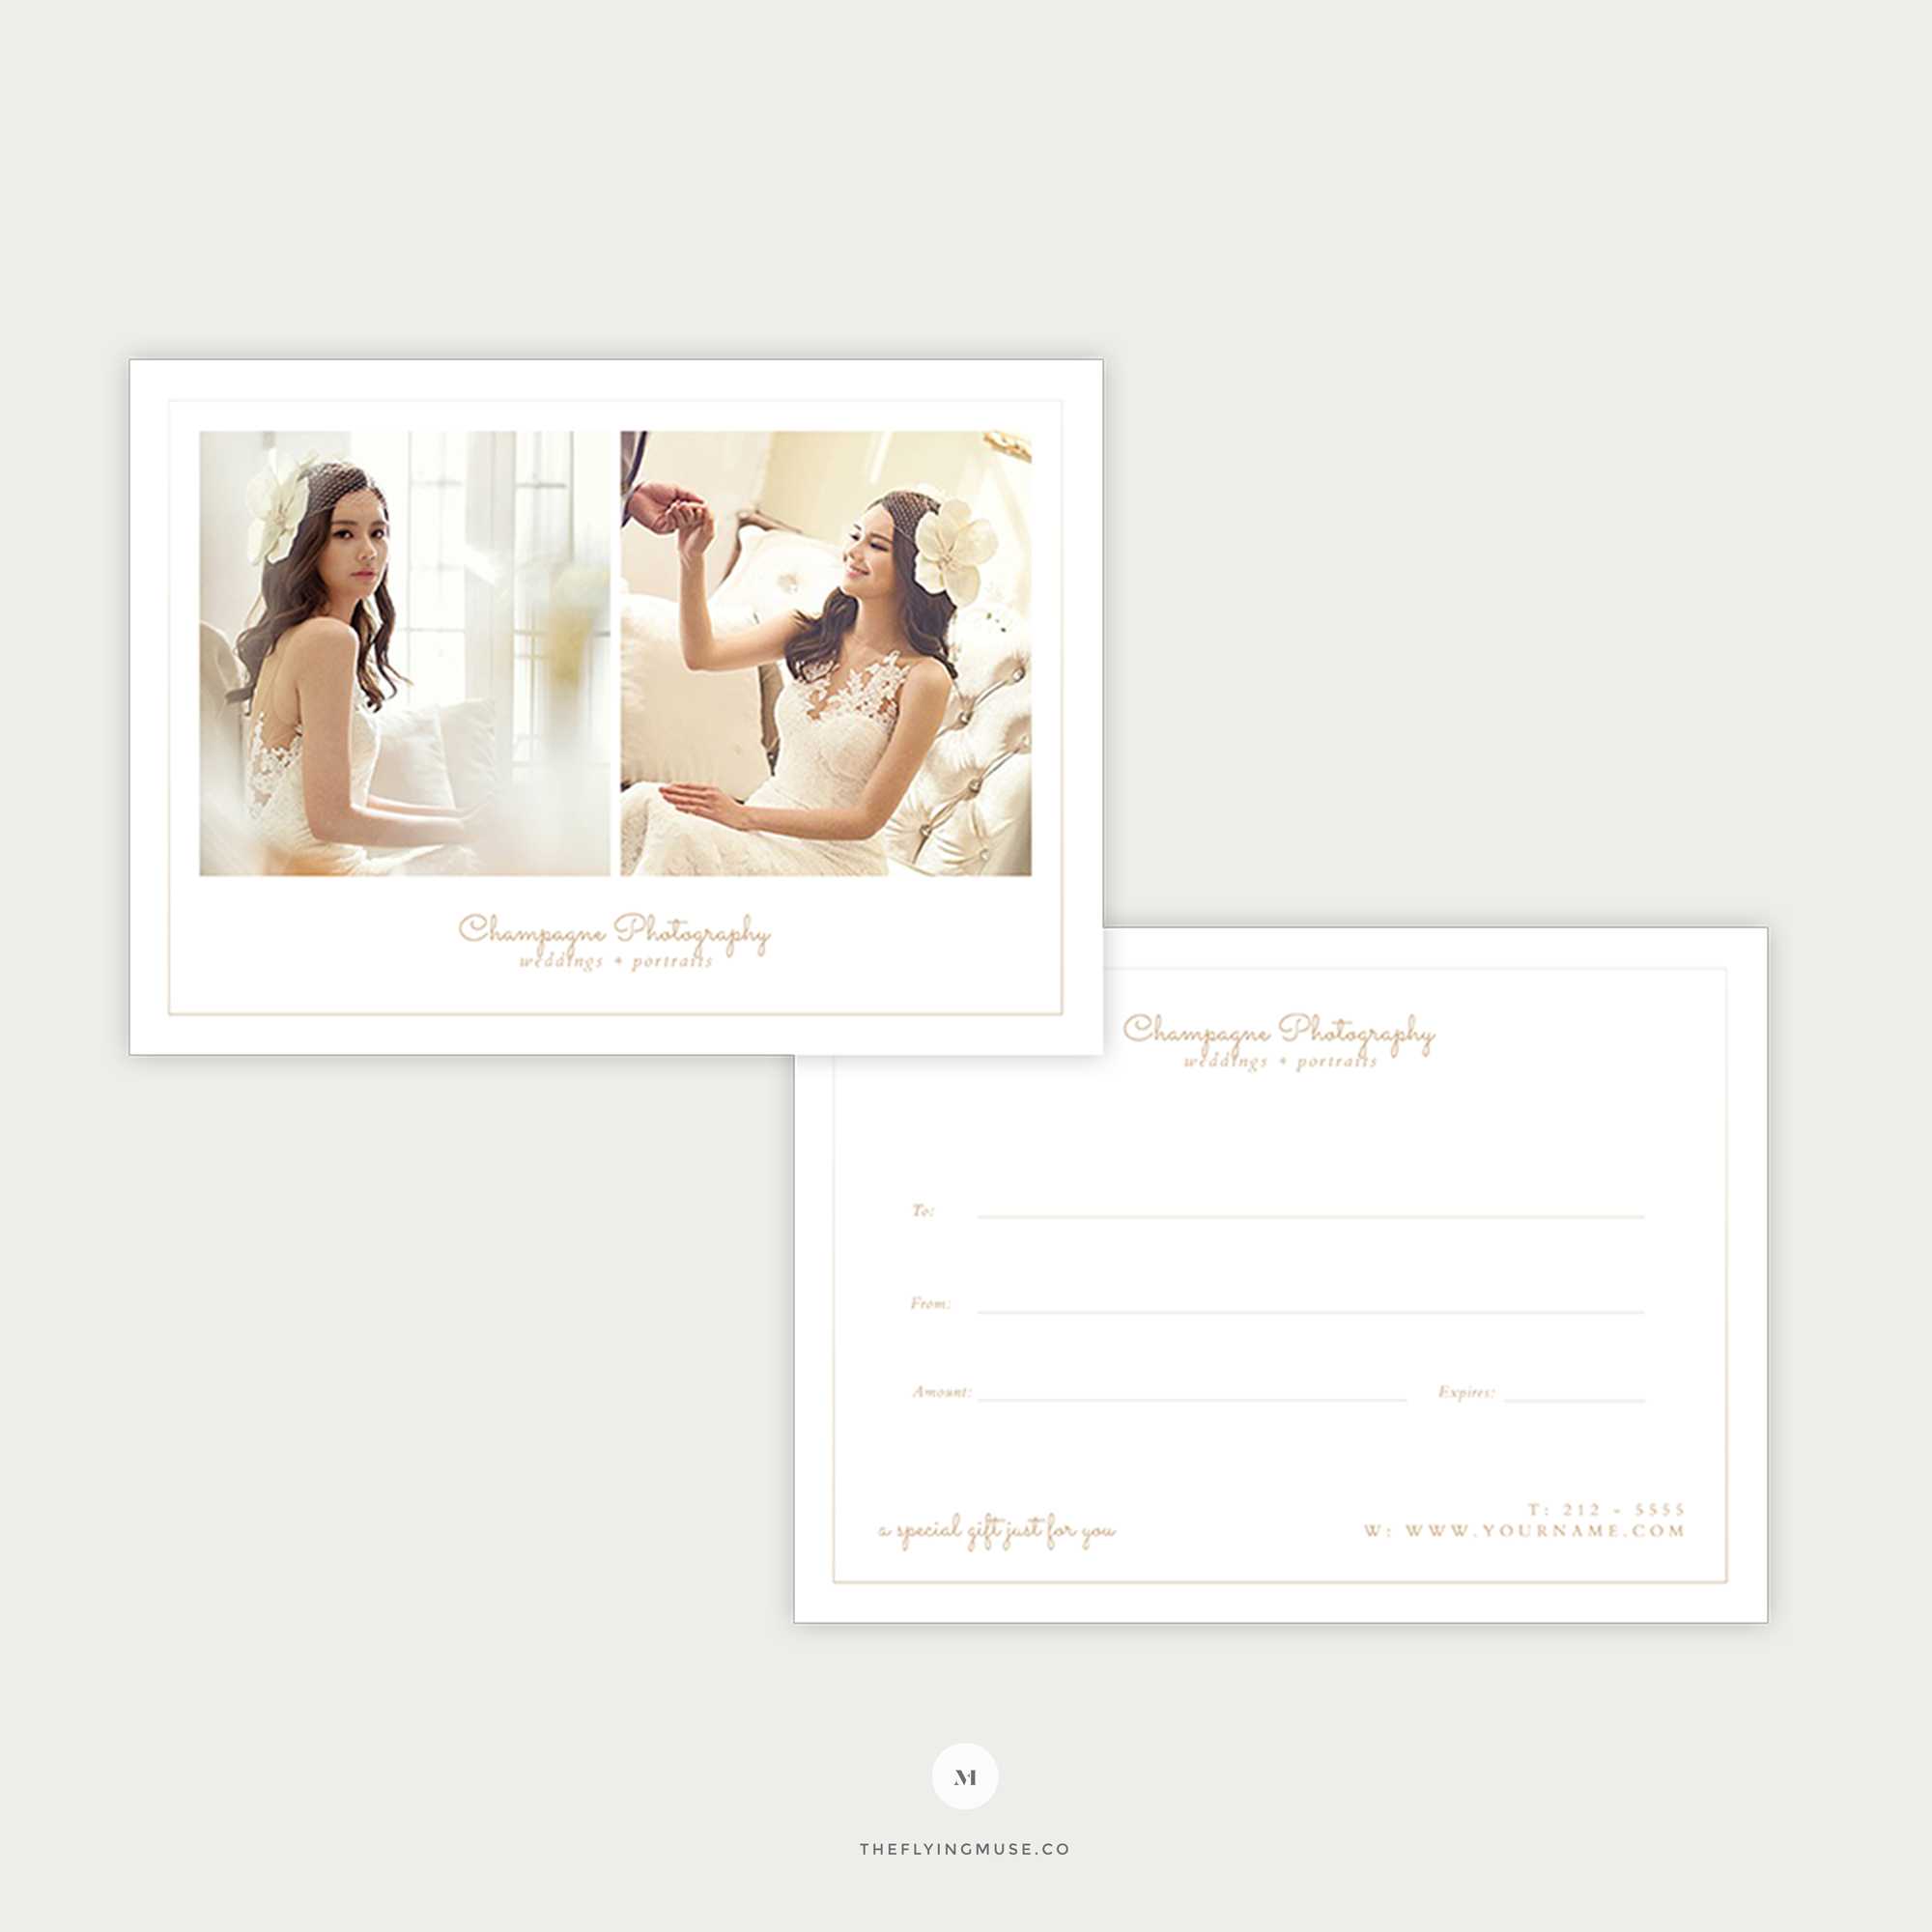 Photoshop Gift Certificate Template | Woodsikecol.tk Throughout Photoshoot Gift Certificate Template